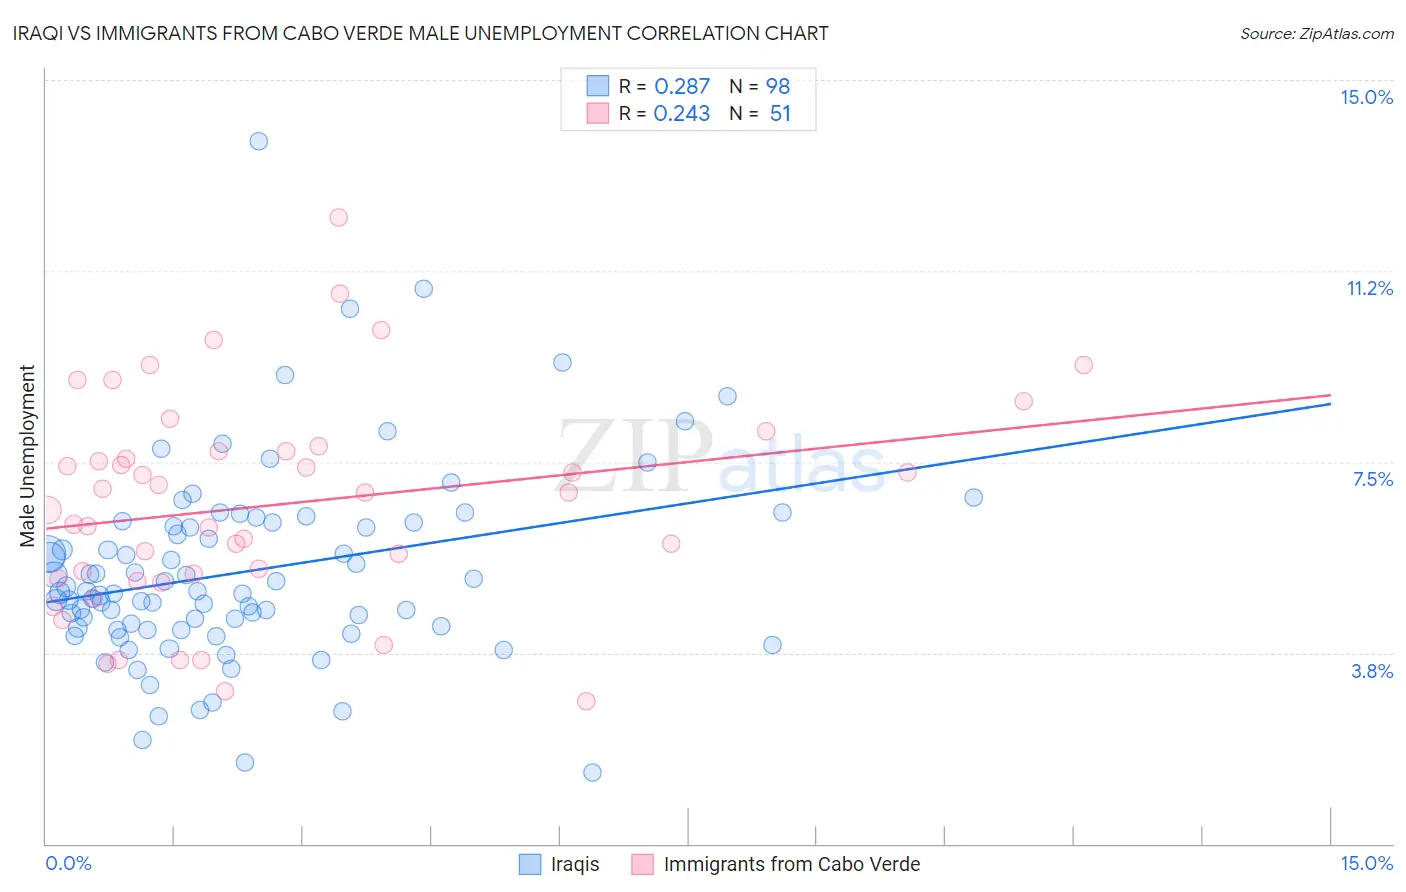 Iraqi vs Immigrants from Cabo Verde Male Unemployment